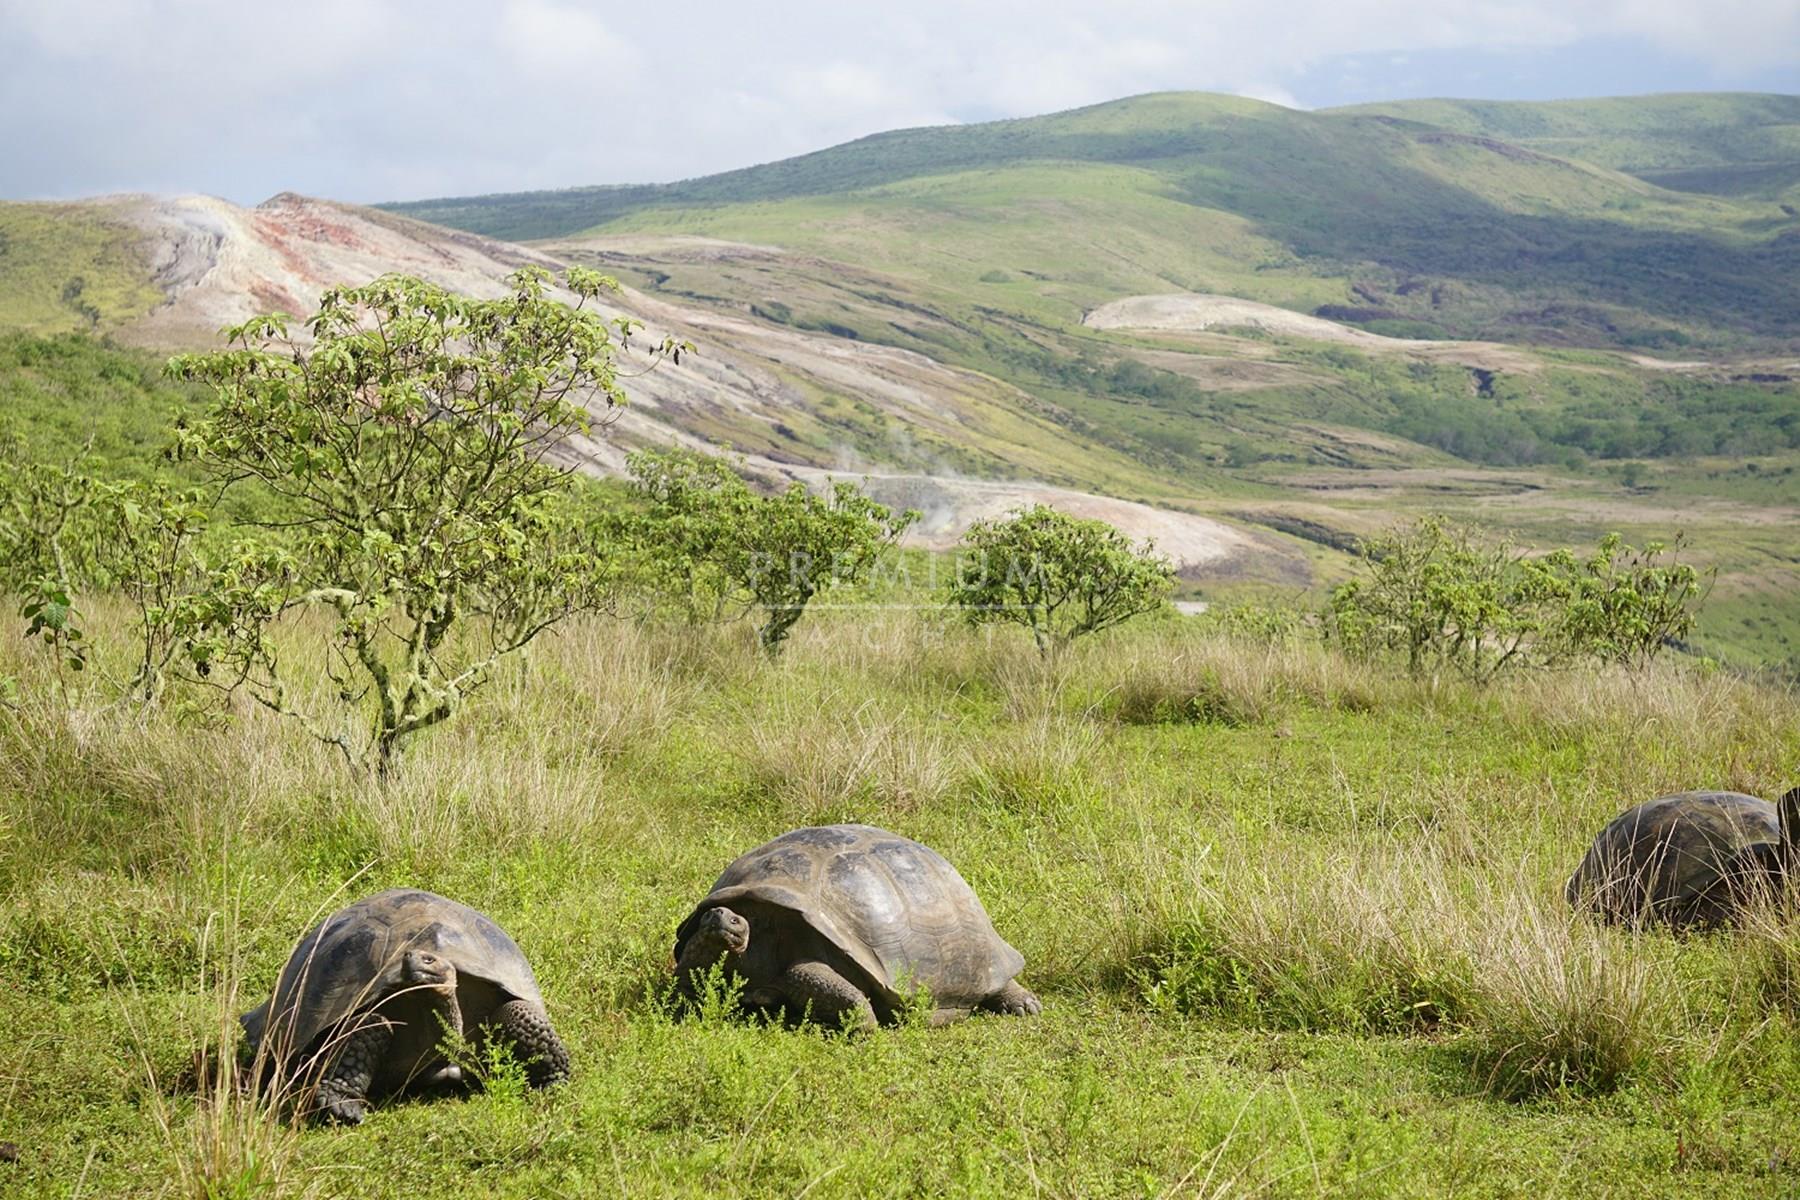 Giant tortoise in the Highlands